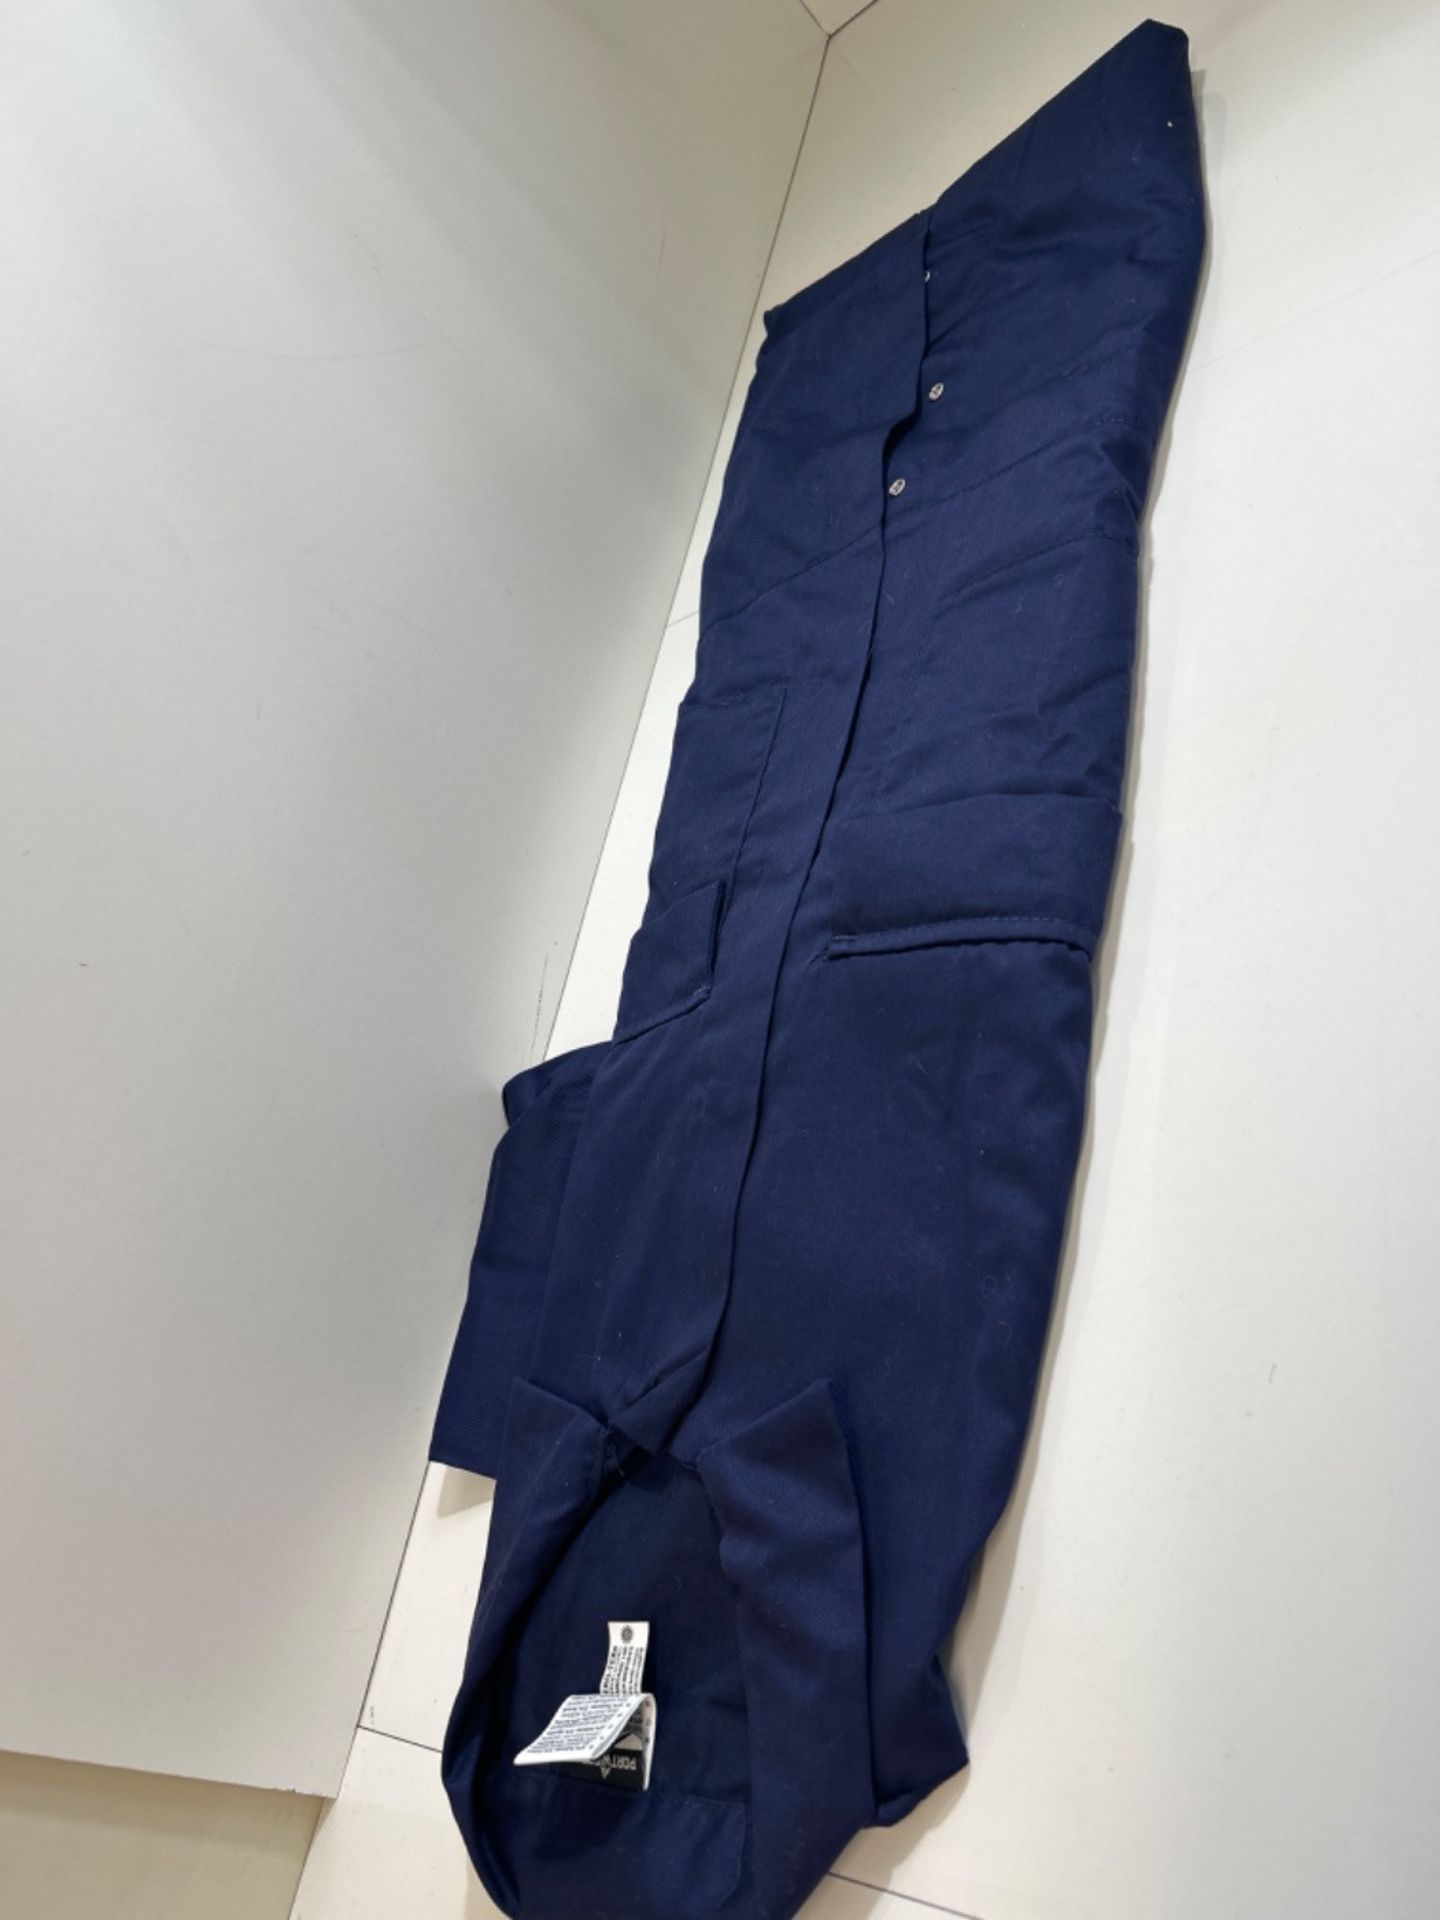 Portwest S999 Men's Euro Workwear Polycotton Coverall Boiler Suit Overalls Navy, M - Image 2 of 3